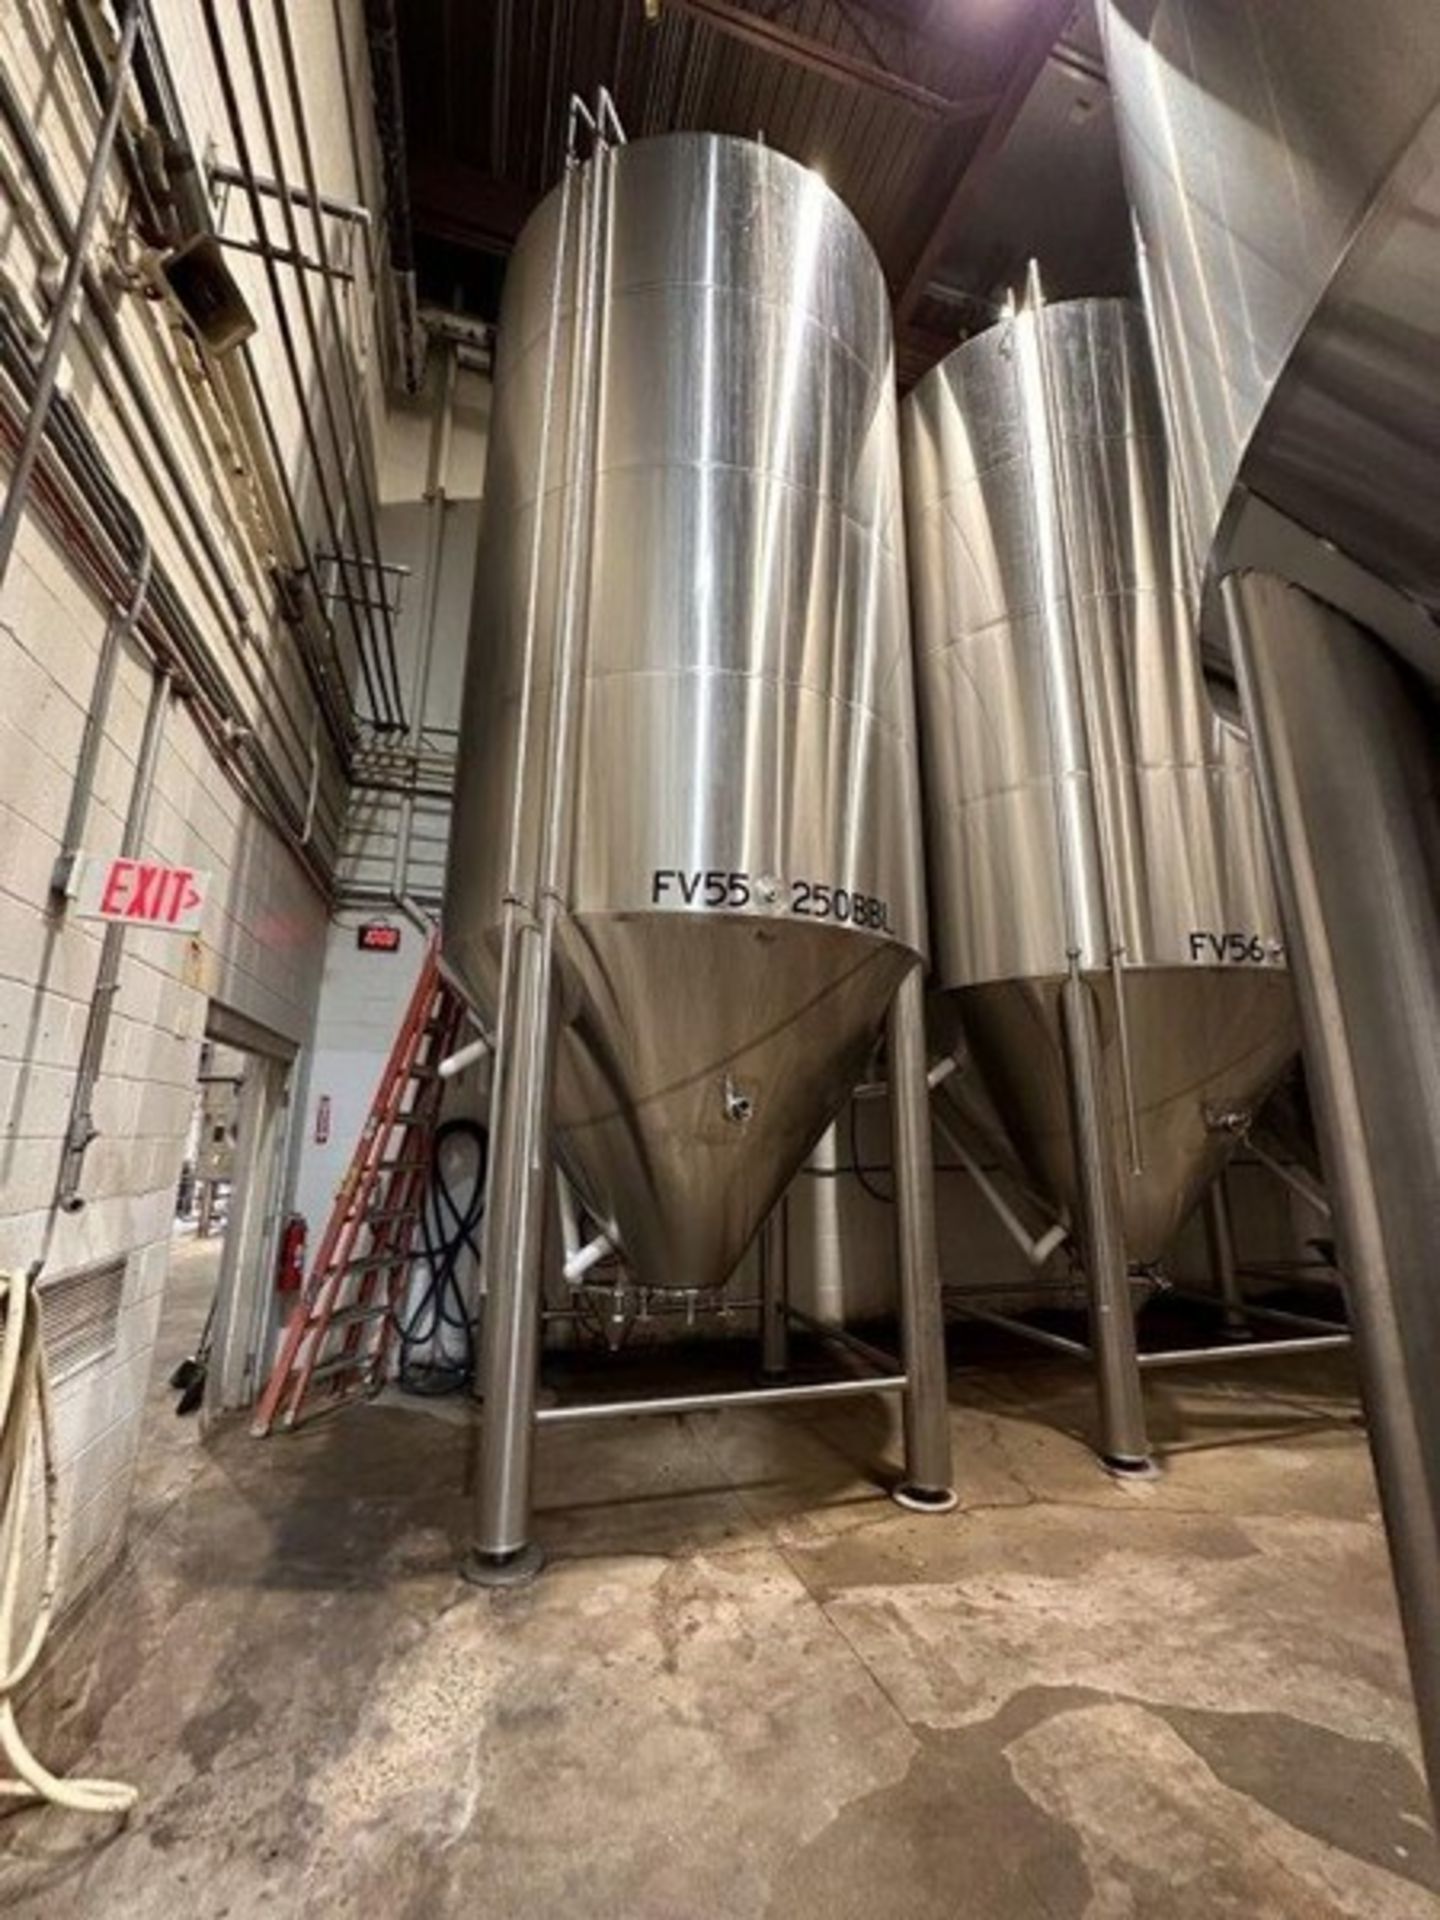 250 BBL (10178 Gallon) Vertical Cone Bottom 304 Stainless Steel Jacketed Vessel. Manufactured by JV